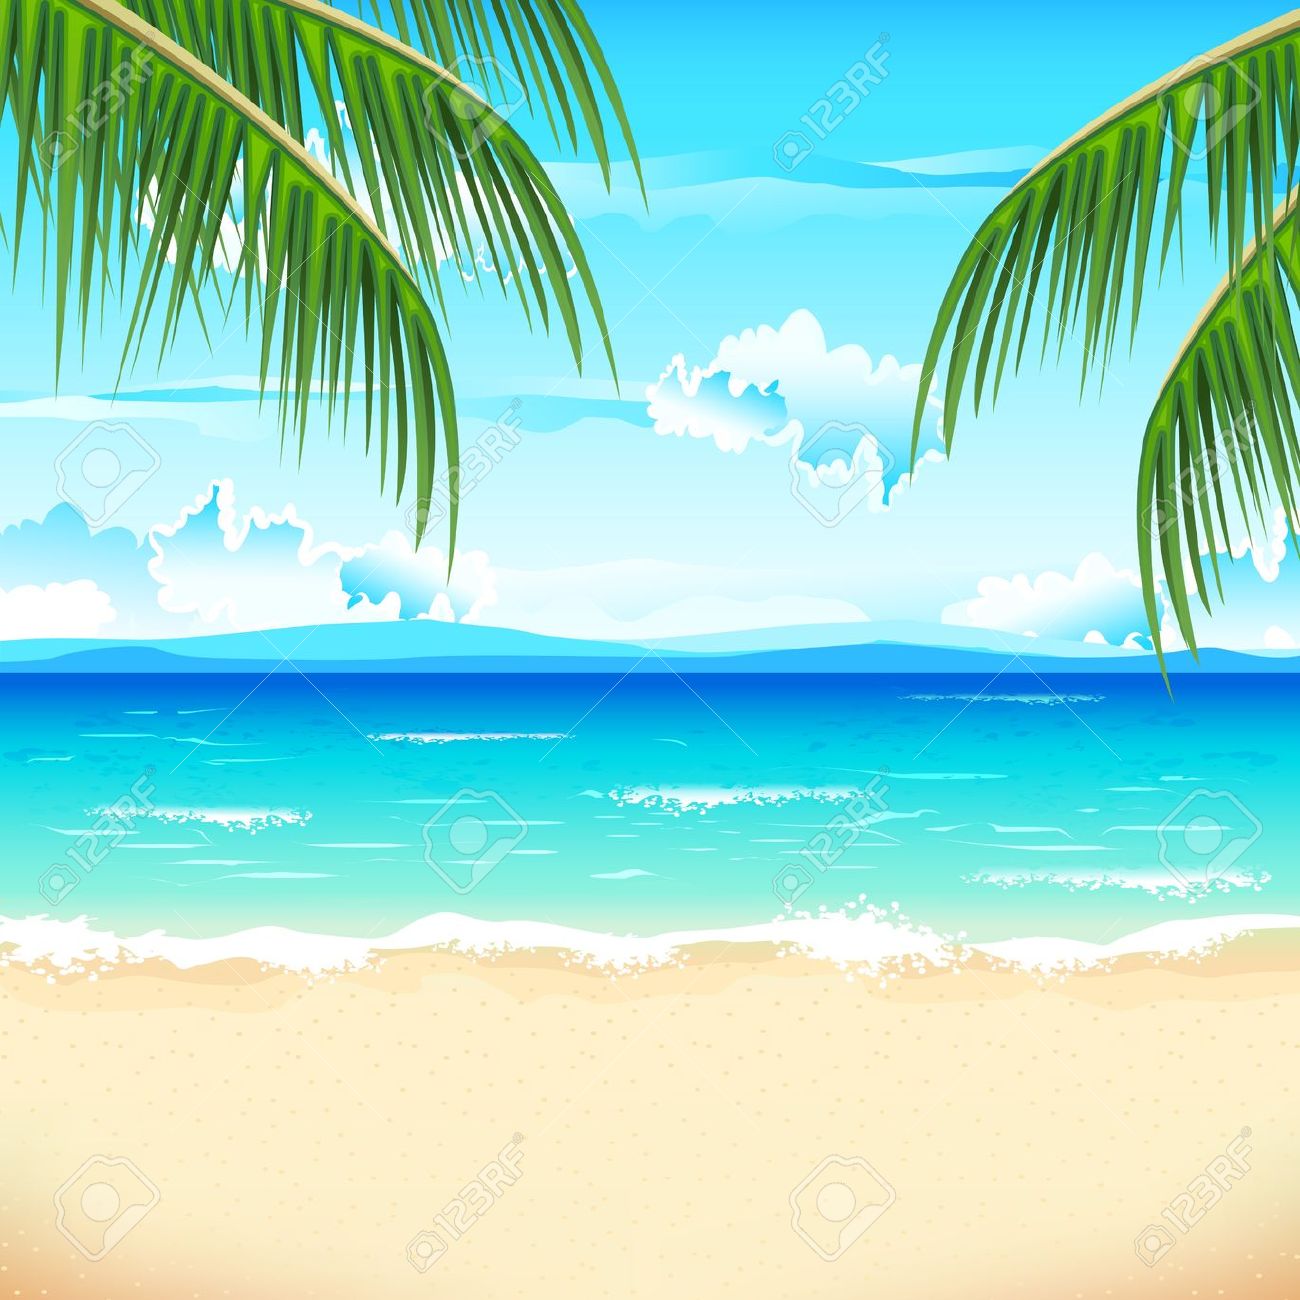 Beach scene stock illustrations cliparts and free